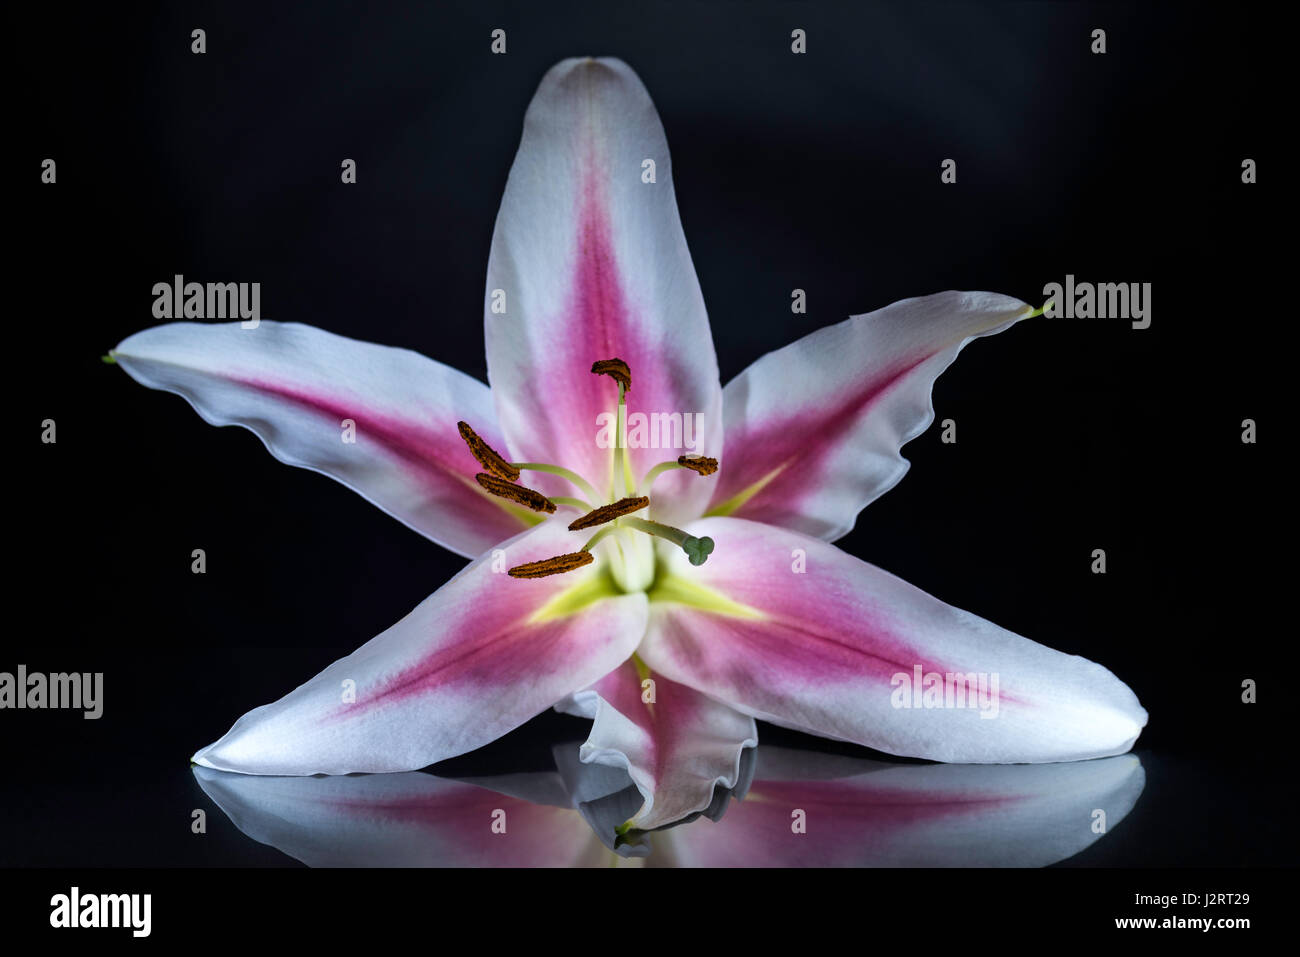 Pink striped Lily Flower emphasizing the beautiful form and structure of the carpel and stamen with petals back lit. Isolated against black background Stock Photo